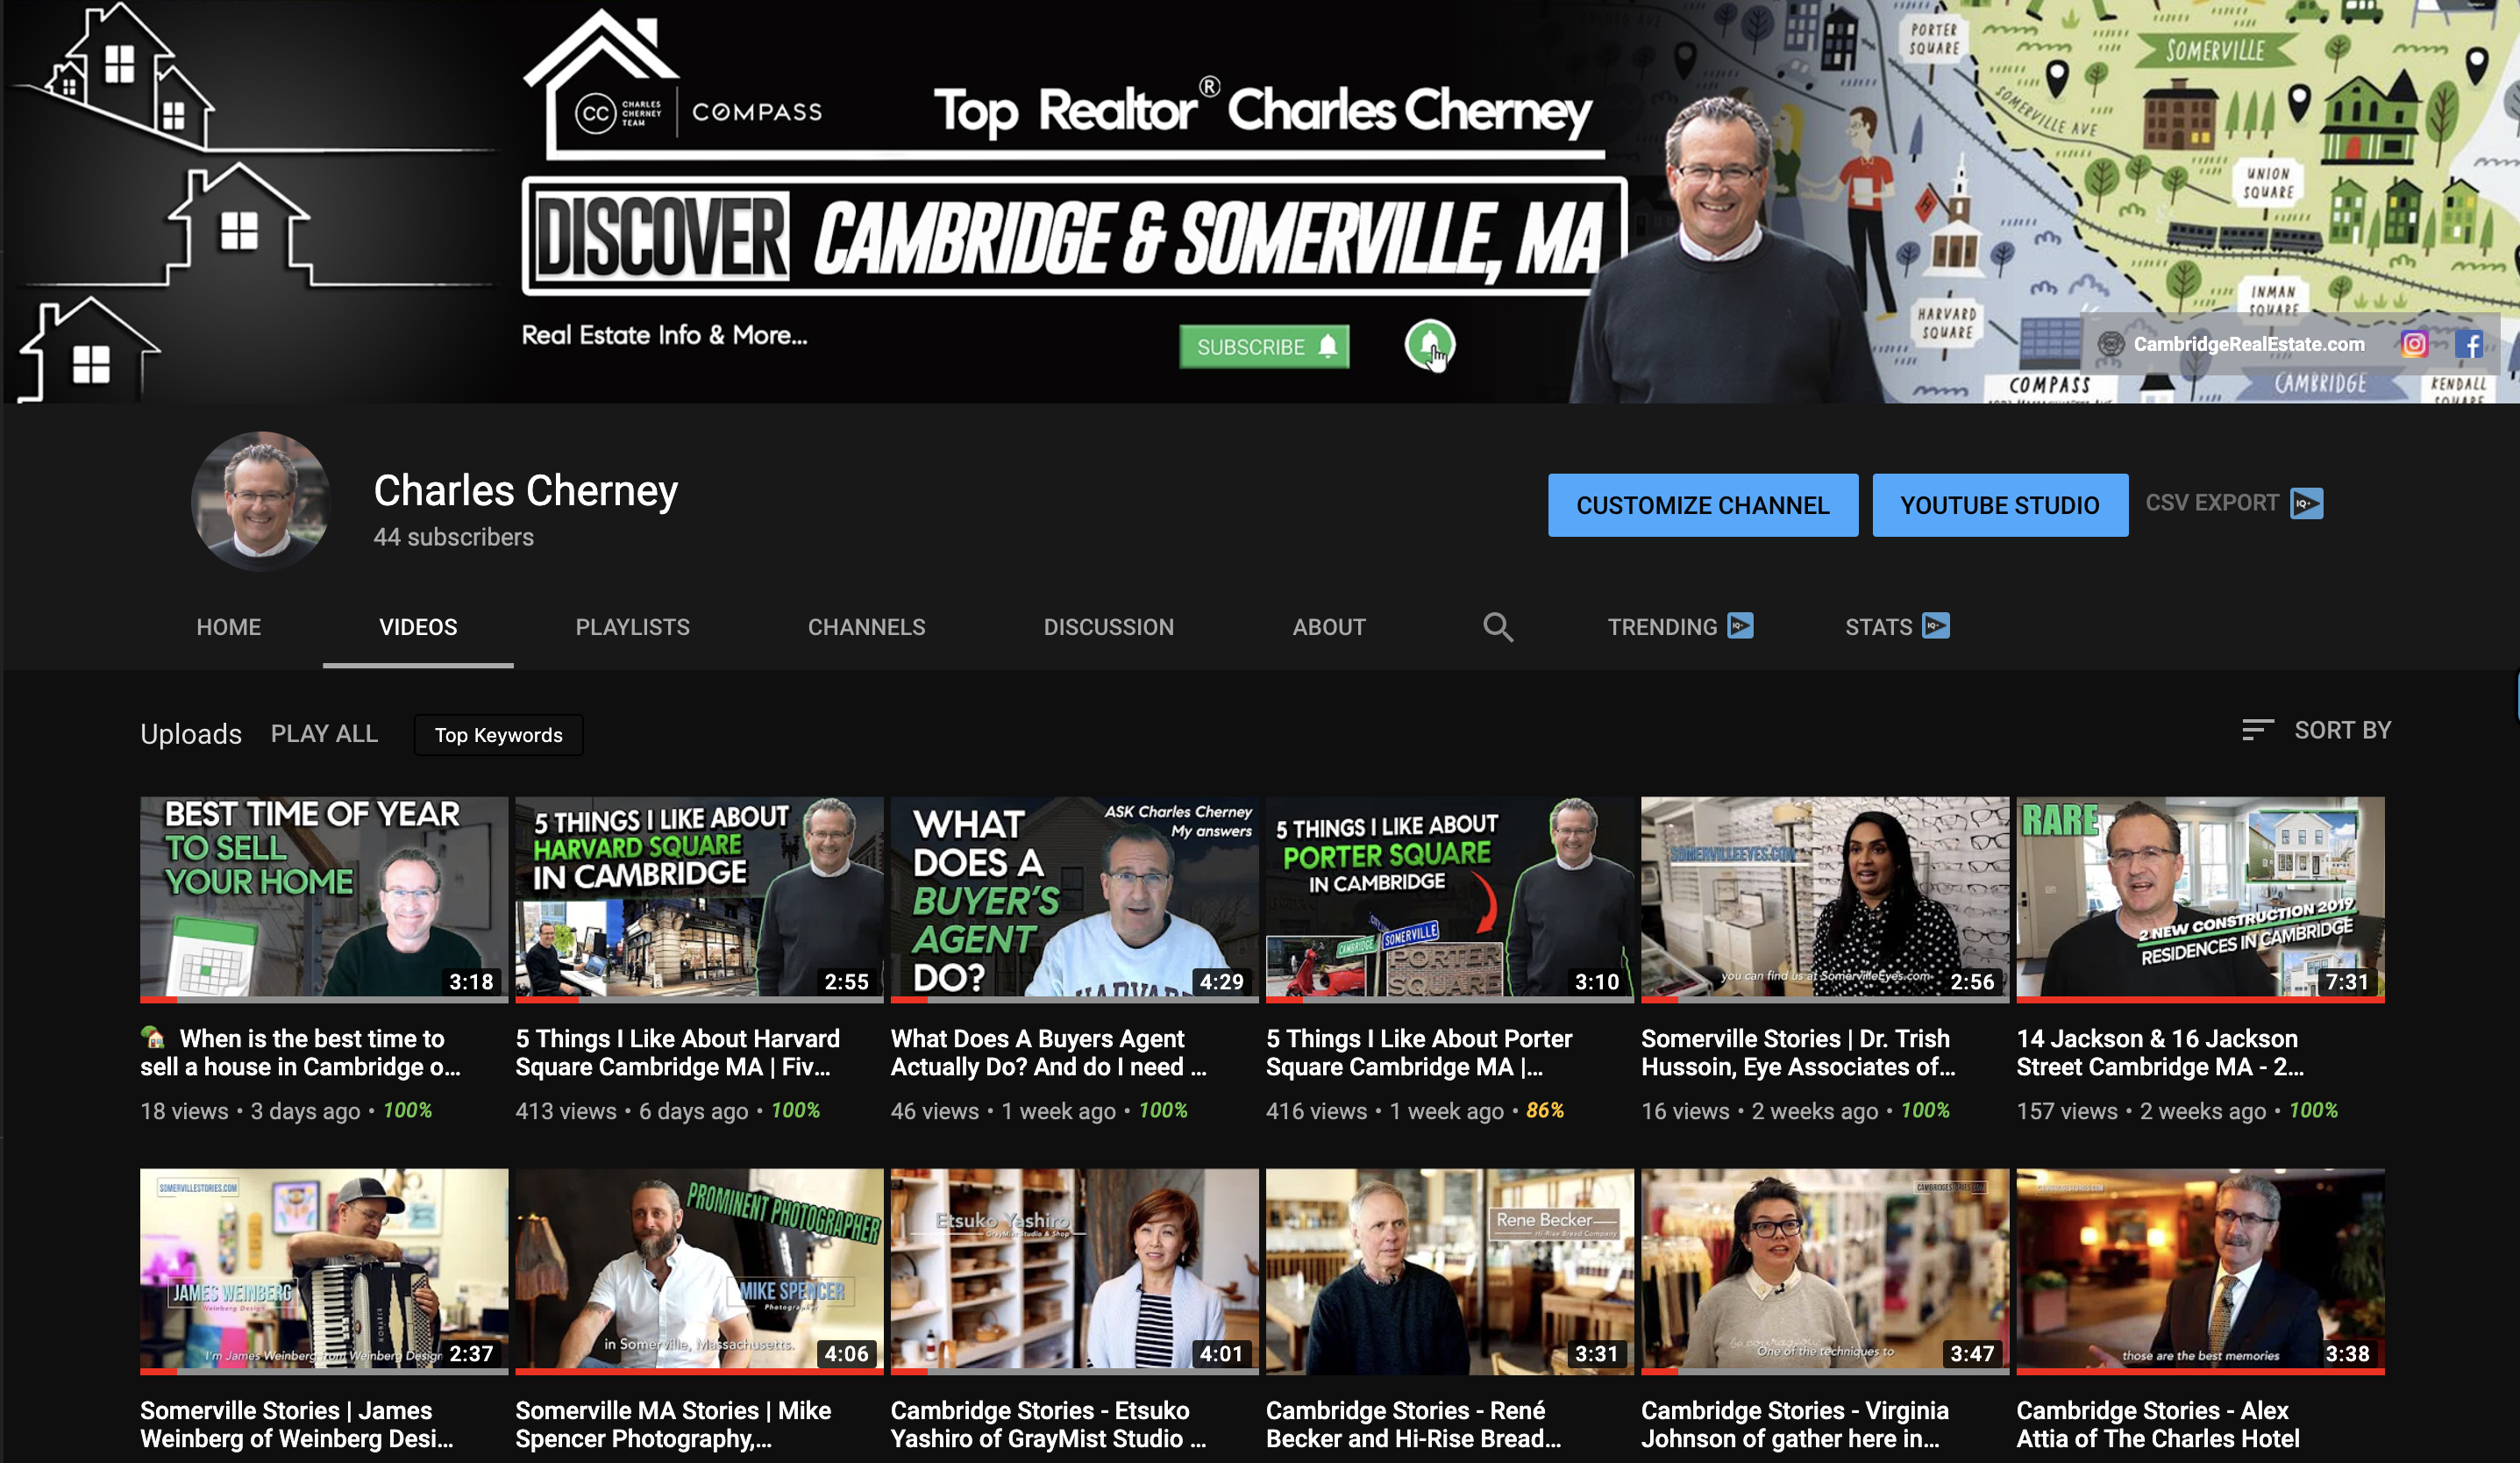 @Charles Cherney - Watch my Youtube Videos!